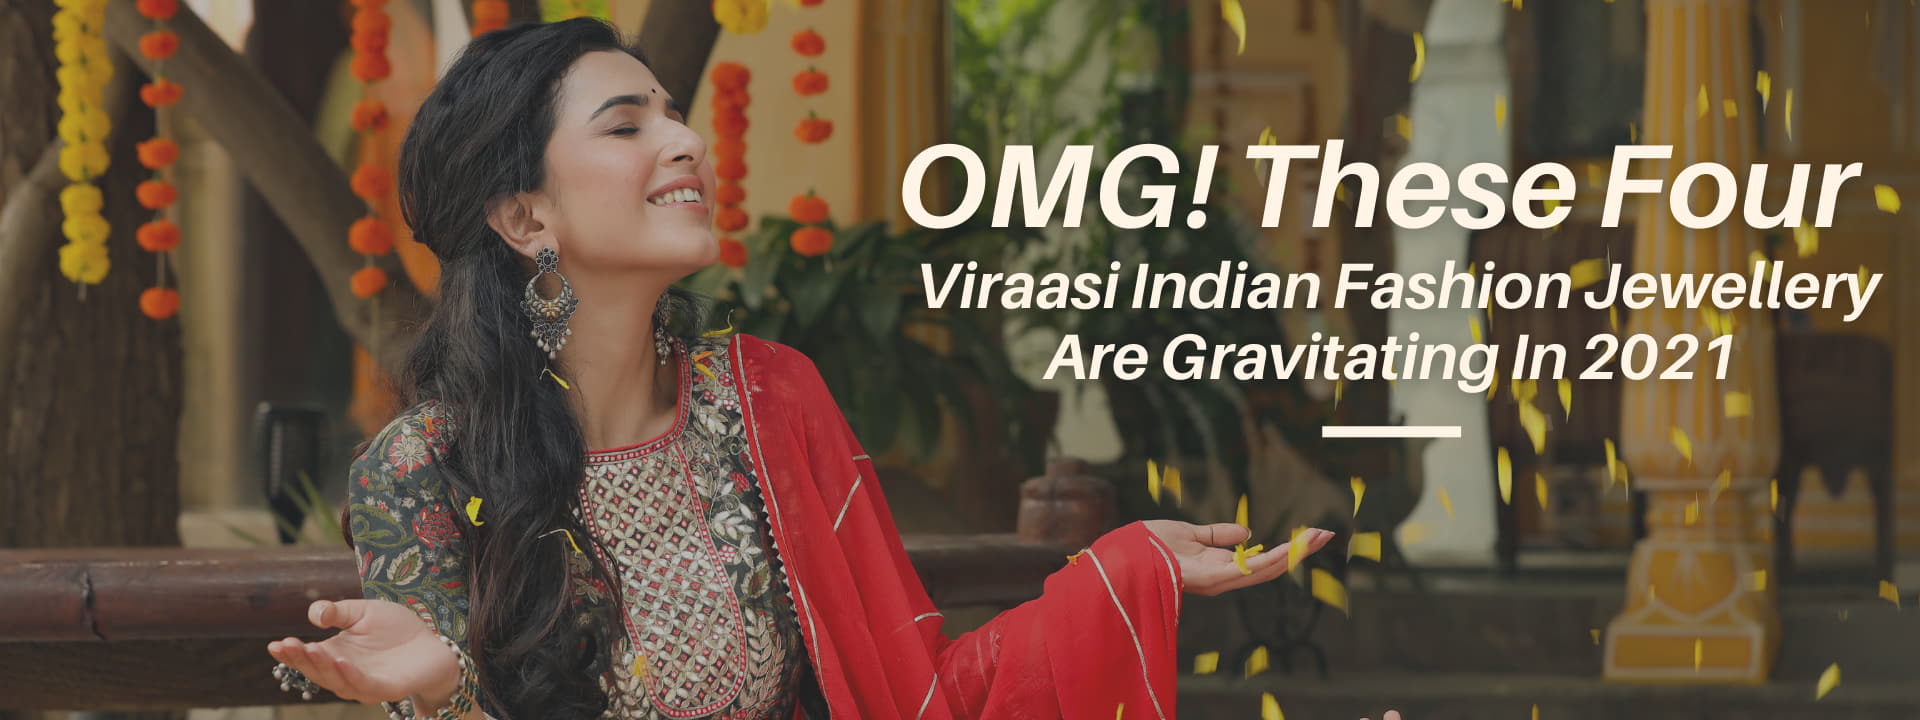 OMG! These Four Viraasi Indian Fashion Jewellery Are Gravitating In 2021-viraasi